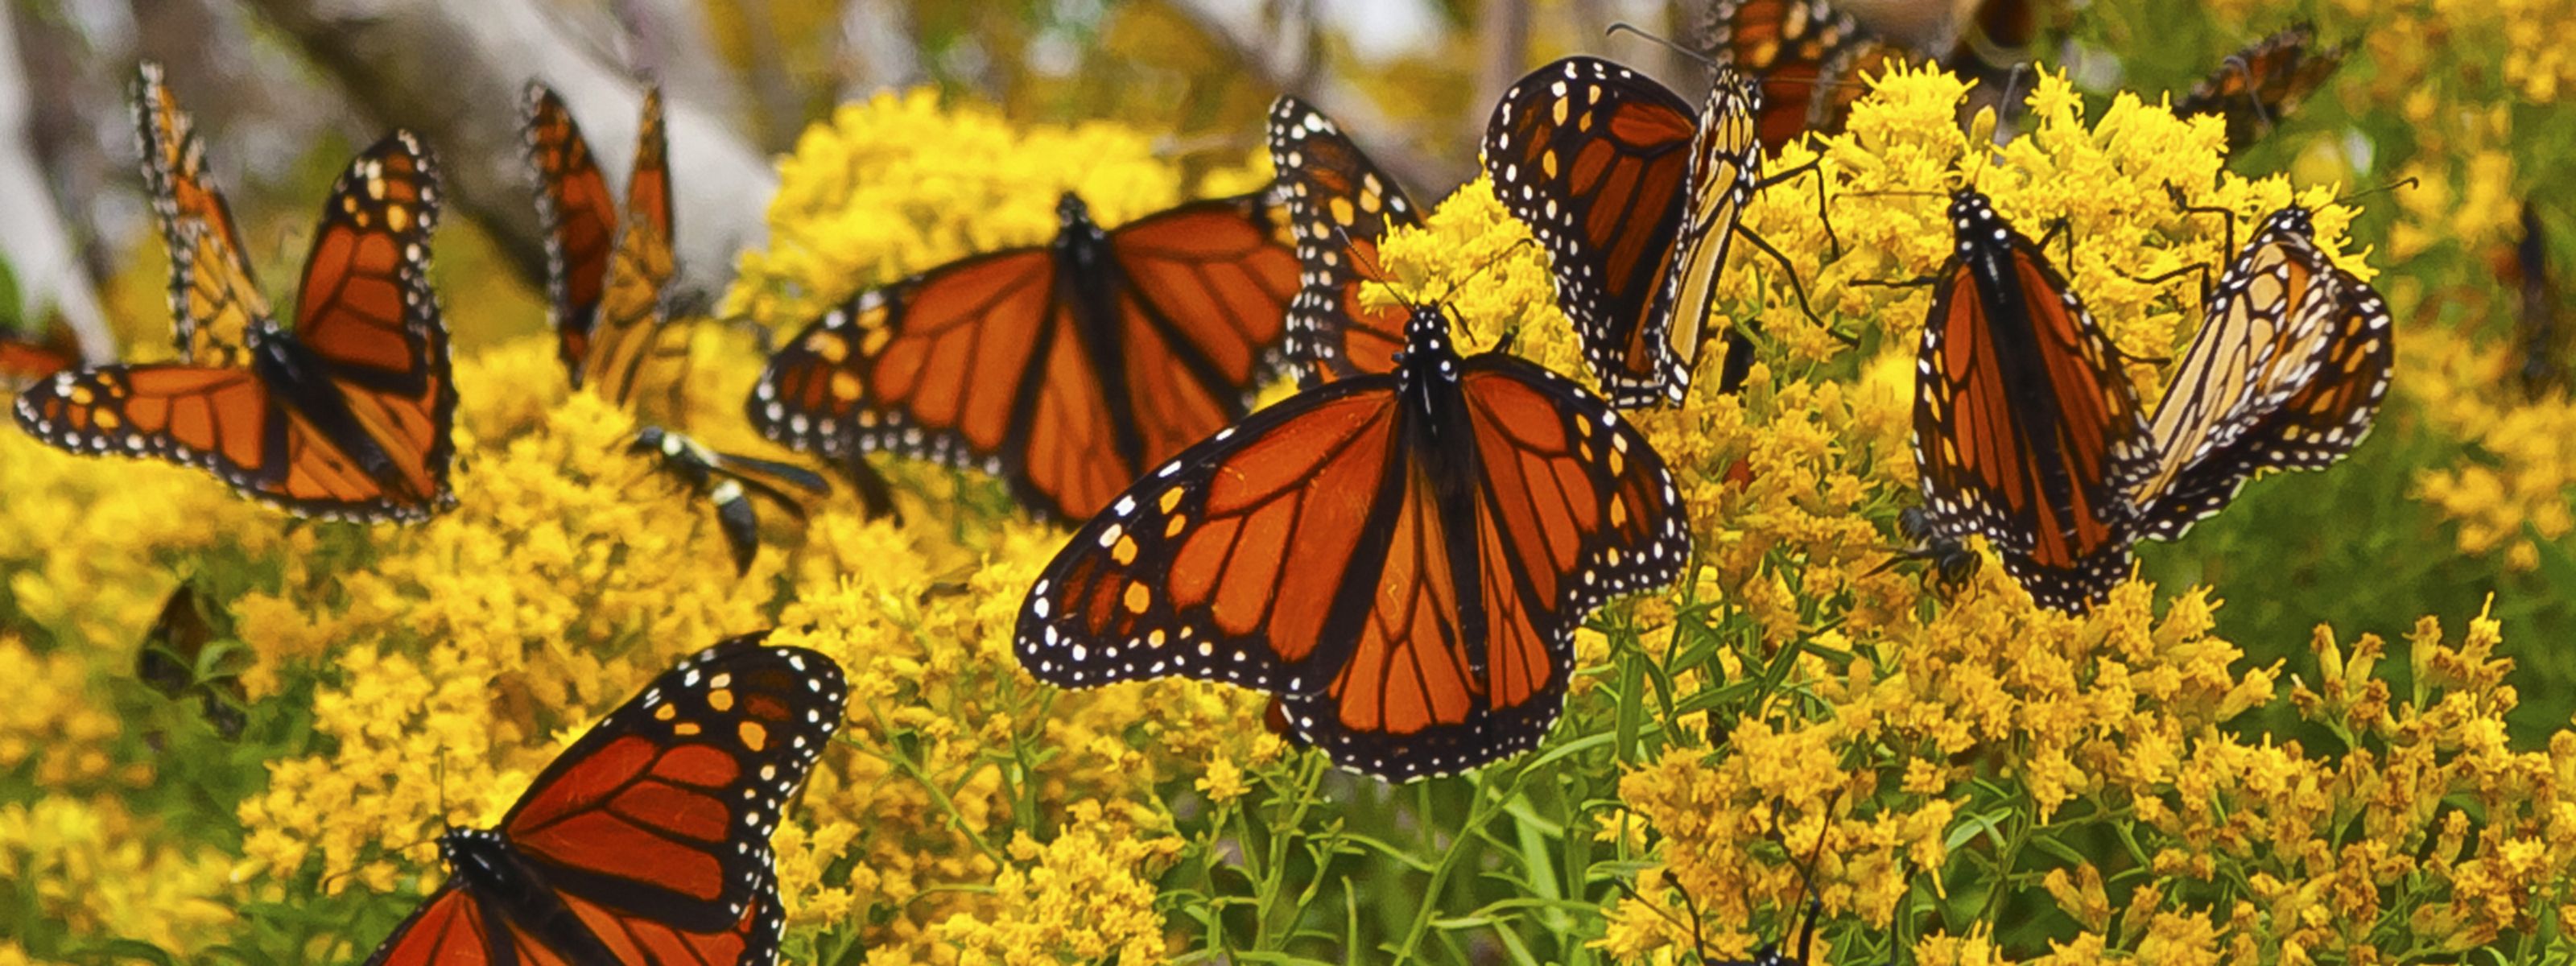 Several Monarch butterflies rest on a shrub of yellow flowers.